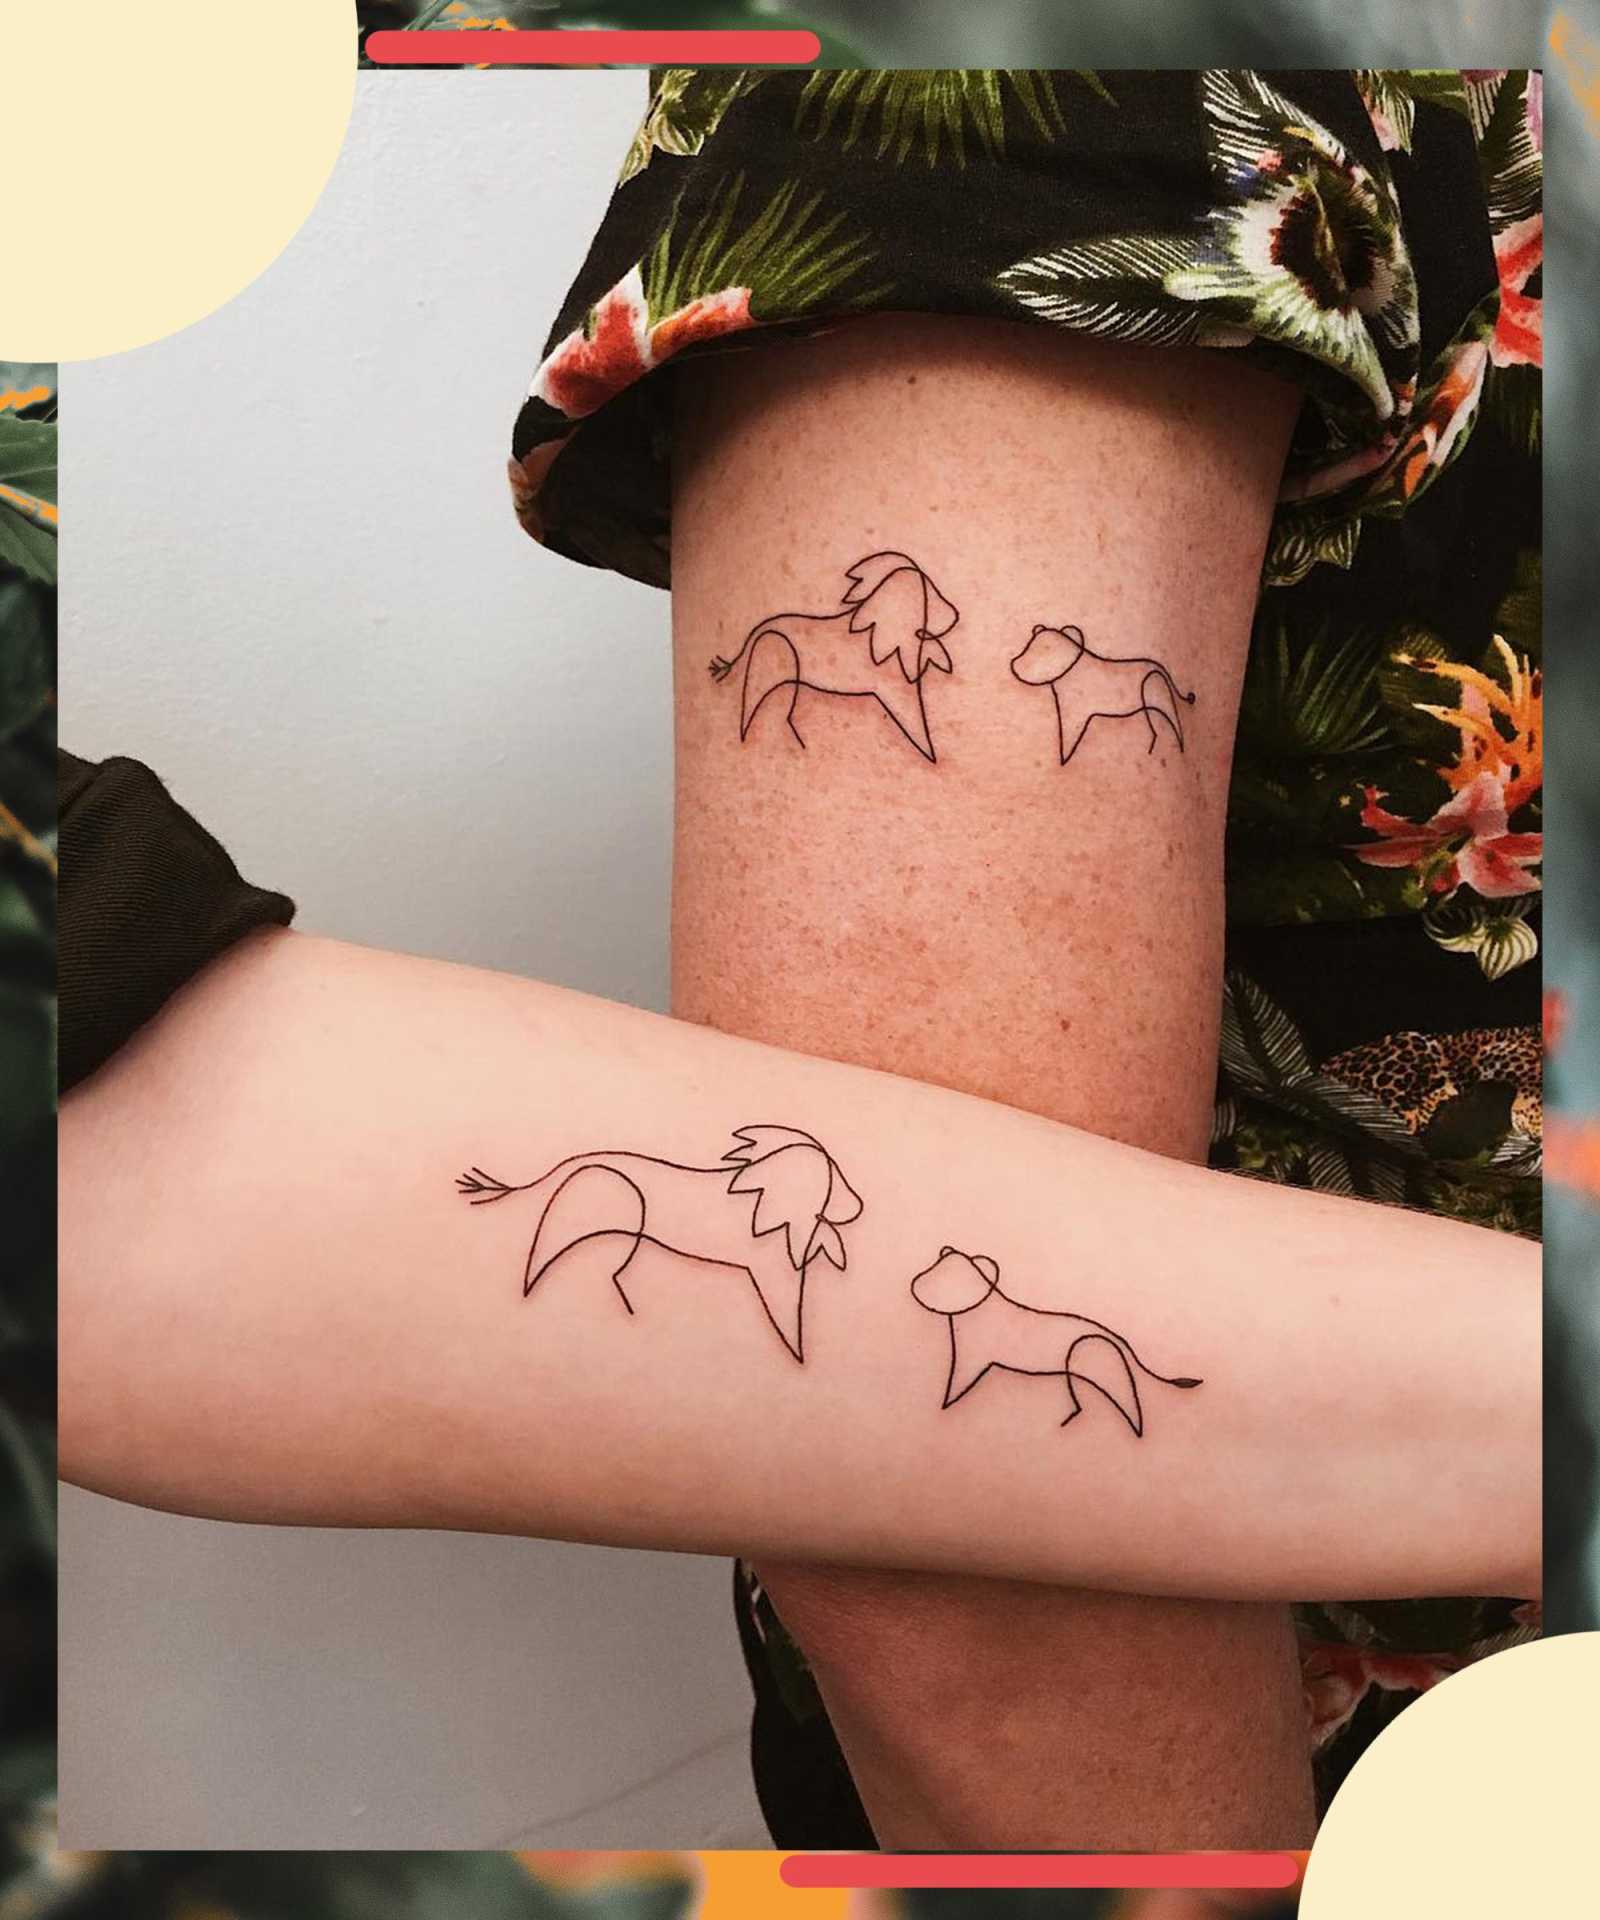 Father-Daughter Tattoos For A Permanent Bond With Dad